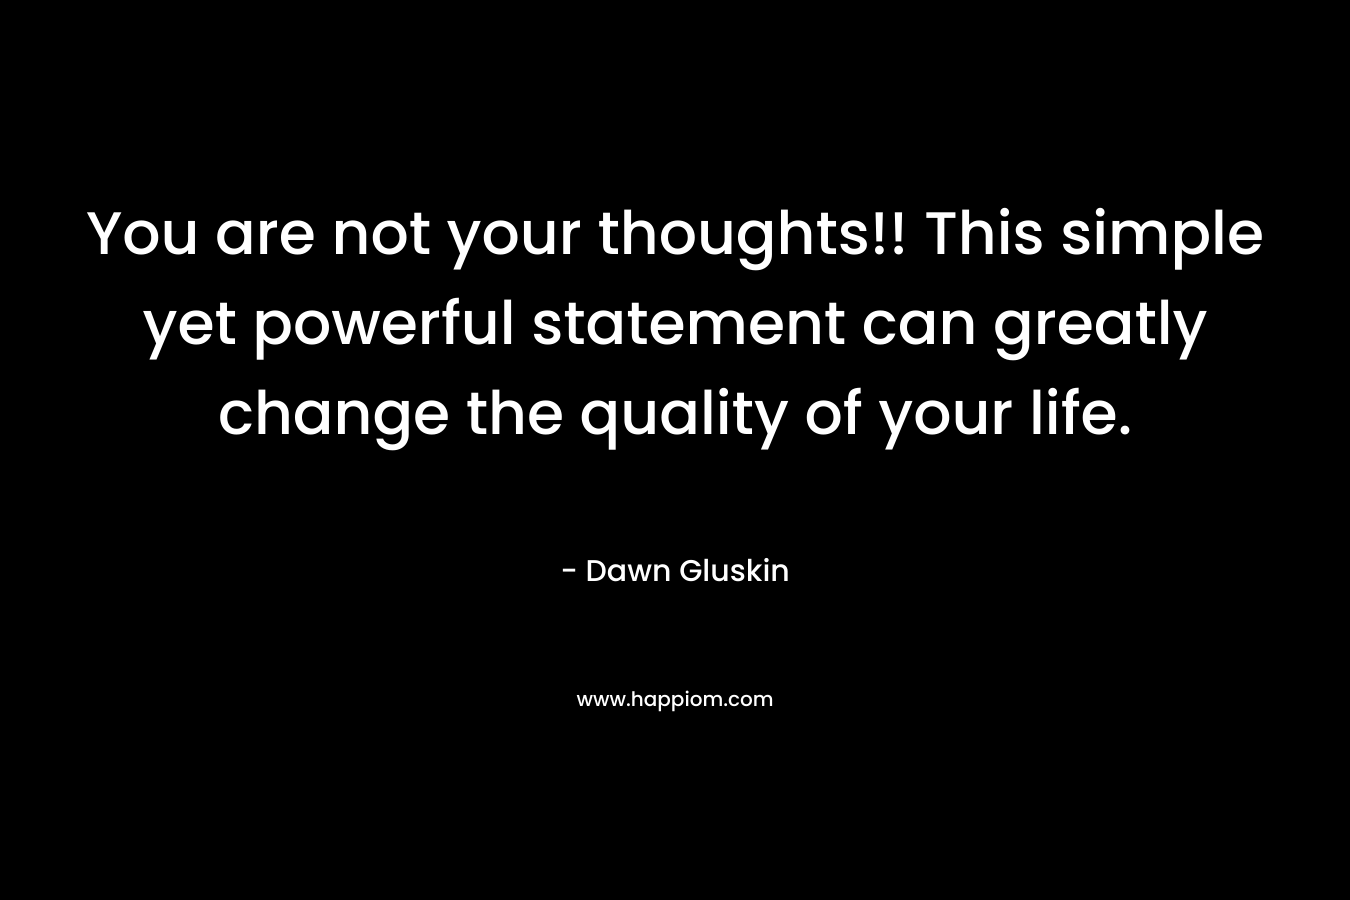 You are not your thoughts!! This simple yet powerful statement can greatly change the quality of your life. – Dawn Gluskin